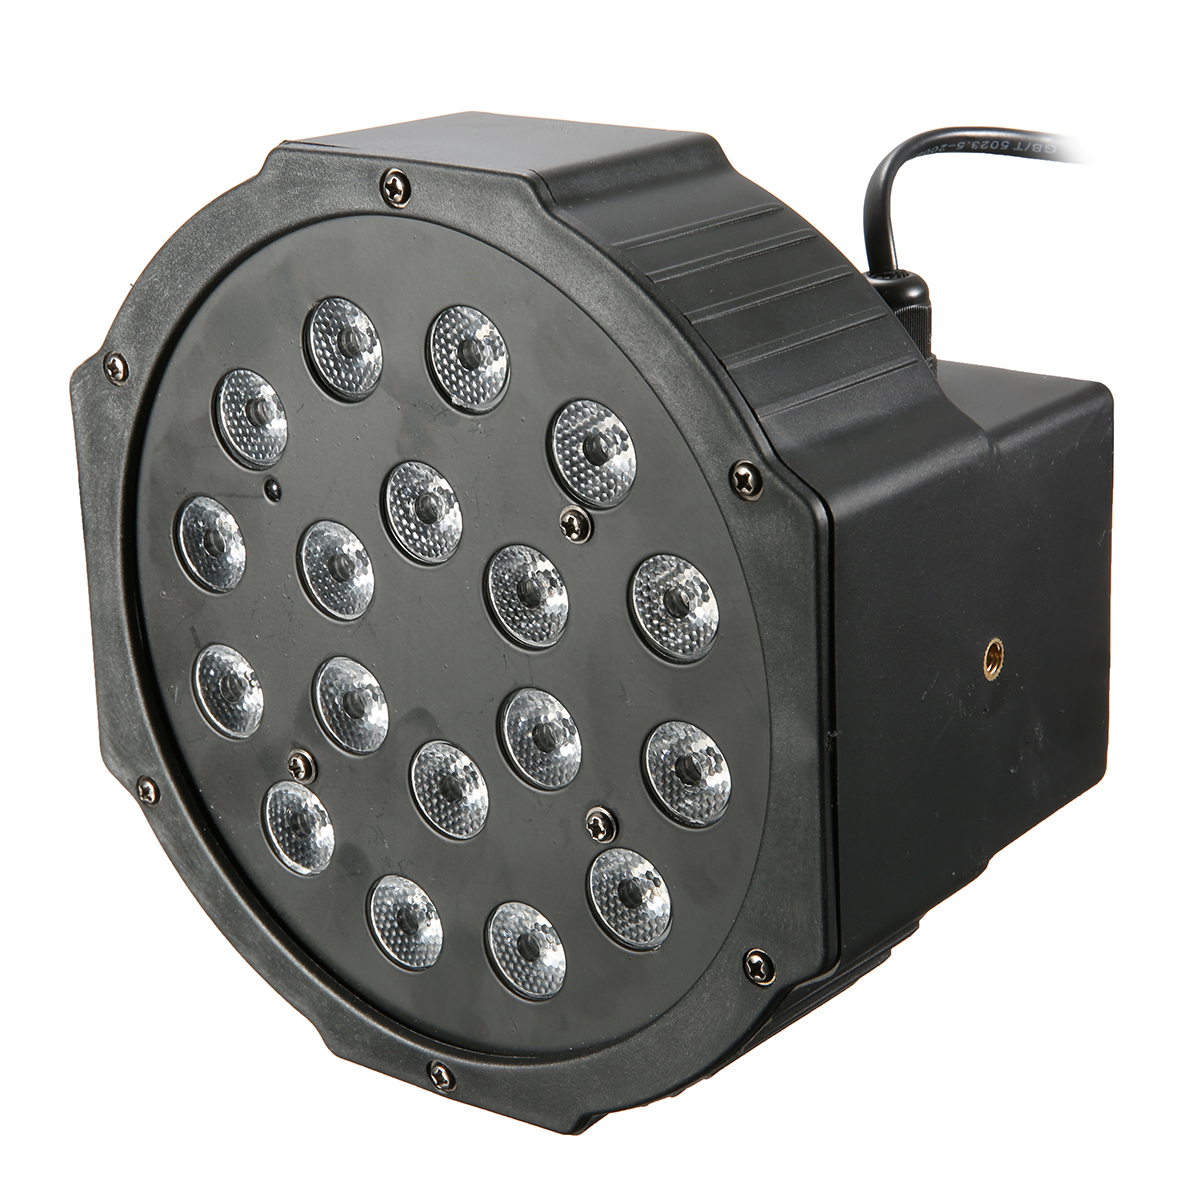 Find SOLMORE 18W DMX 512 RGB LED Par Stage Lighting Party DJ Disco KTV Christmas Projector Light AC110 220V for Sale on Gipsybee.com with cryptocurrencies